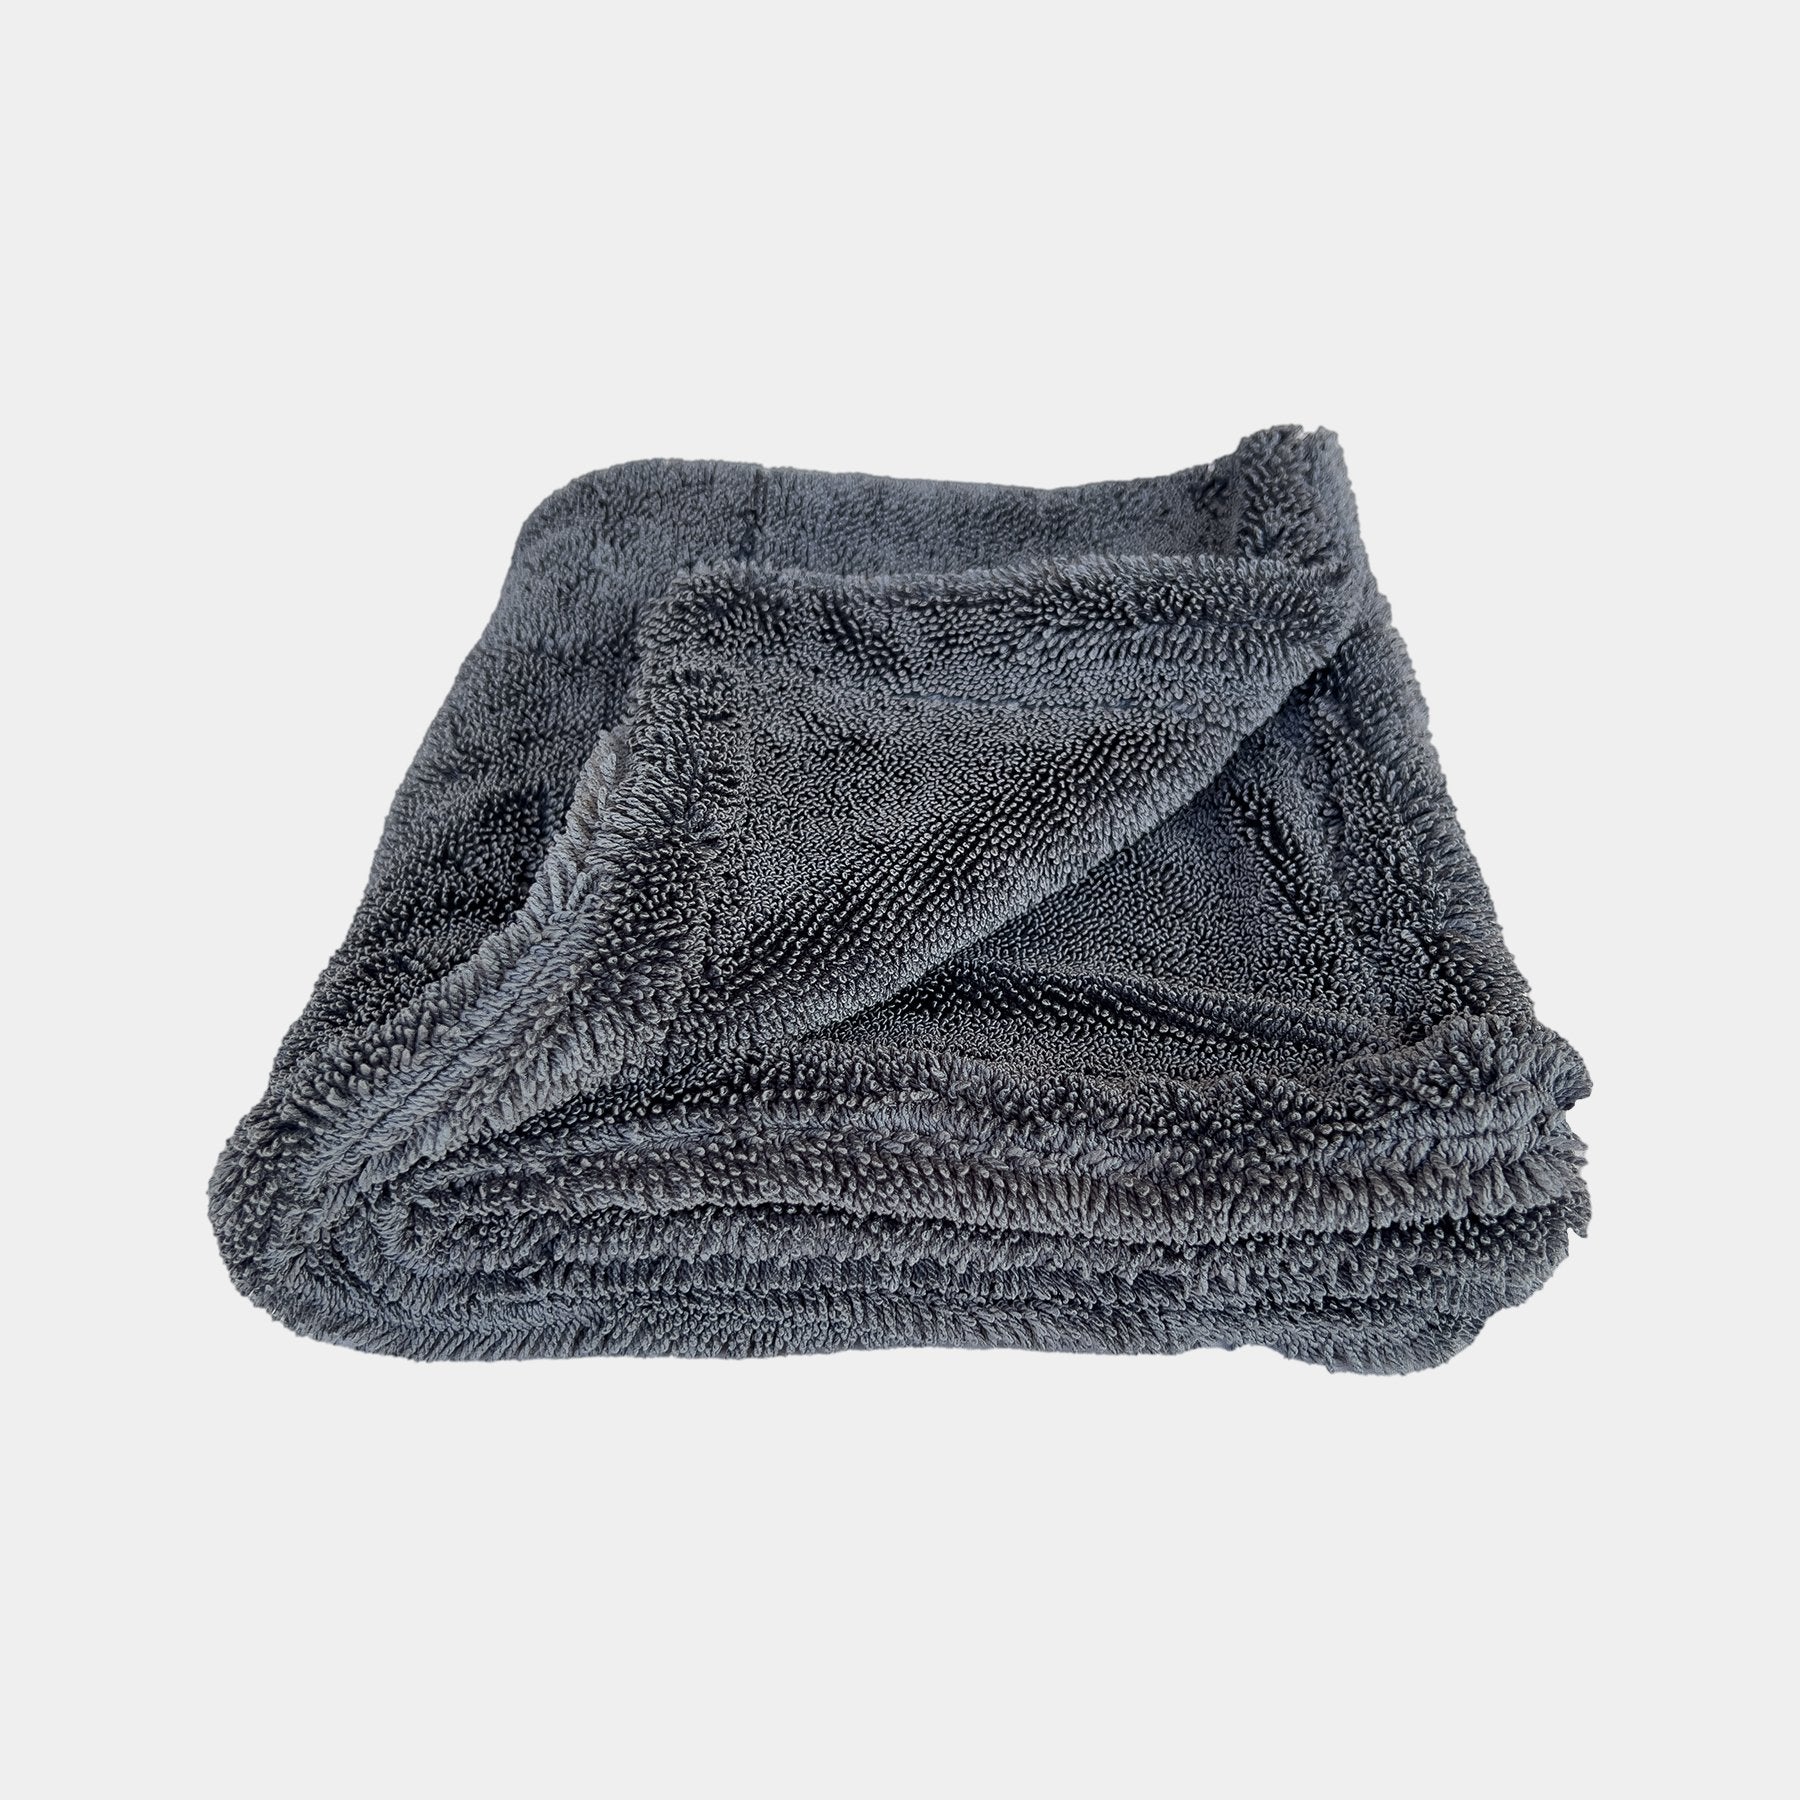 Car care small twisted pile grey microfibre wheel and trim 40x40cm drying towel displayed on a white background.